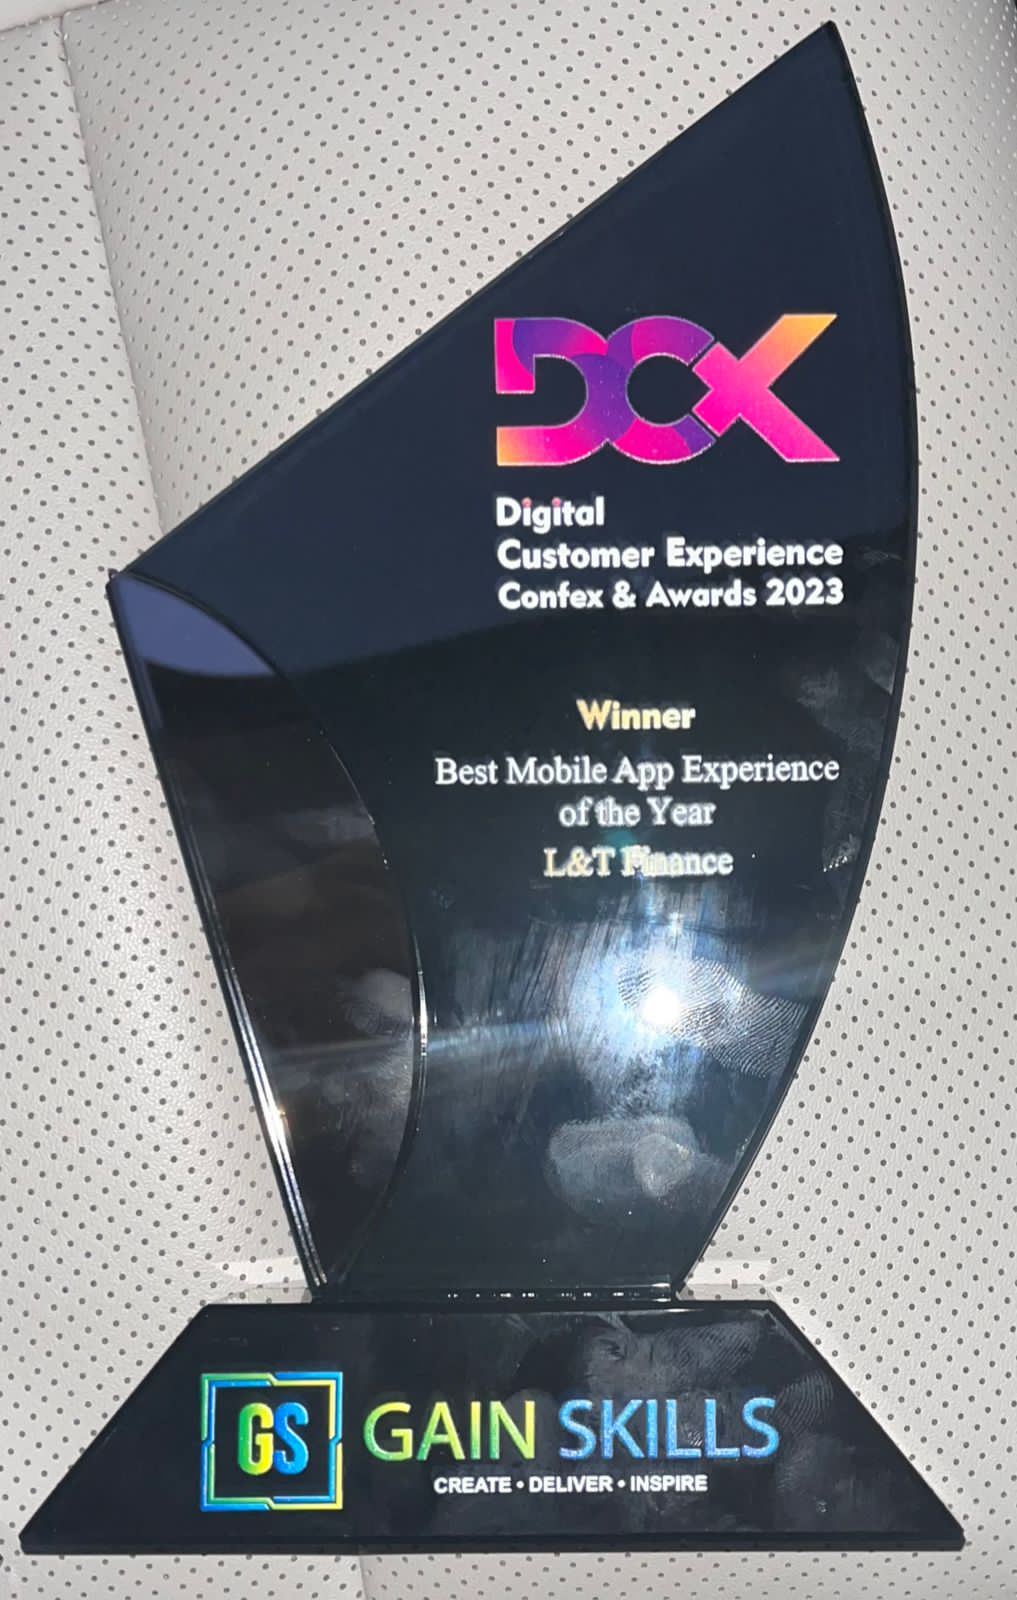 Best Mobile App Experience of the Year for the PLANET App